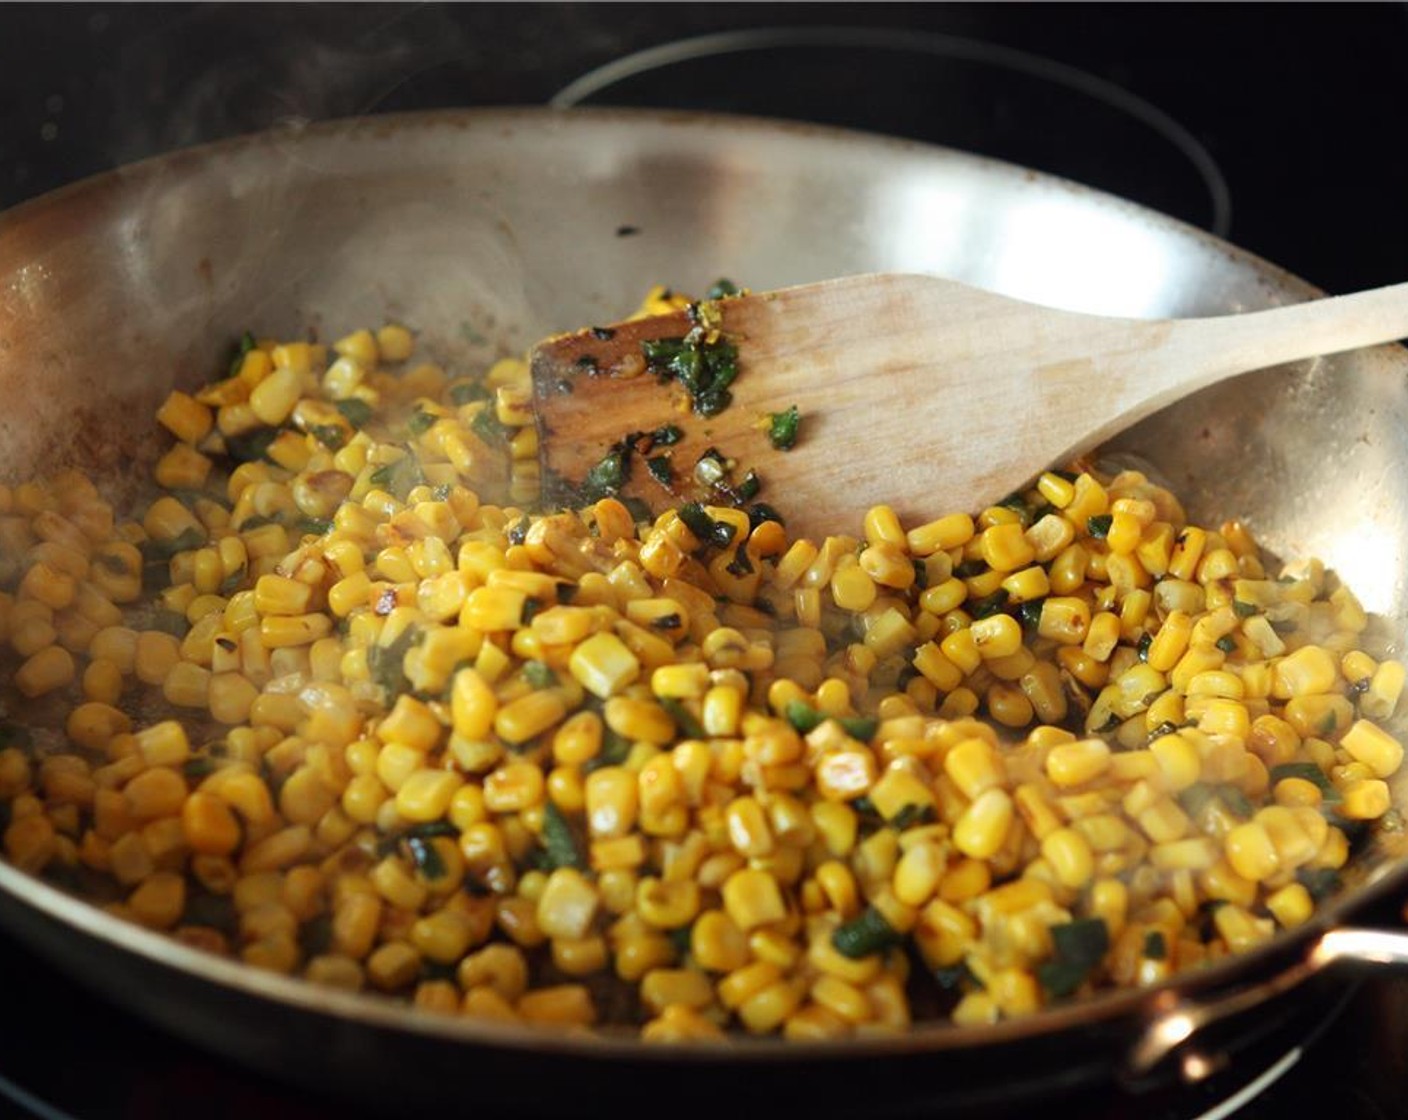 step 2 Add Sweet Corn (2 cans) and sauté for another 5-10 minutes, stirring occasionally. For the last 3 minutes, turn the heat up to medium-high to allow the corn to char, stirring occasionally. Remove from heat and transfer corn mixture to a mixing bowl.